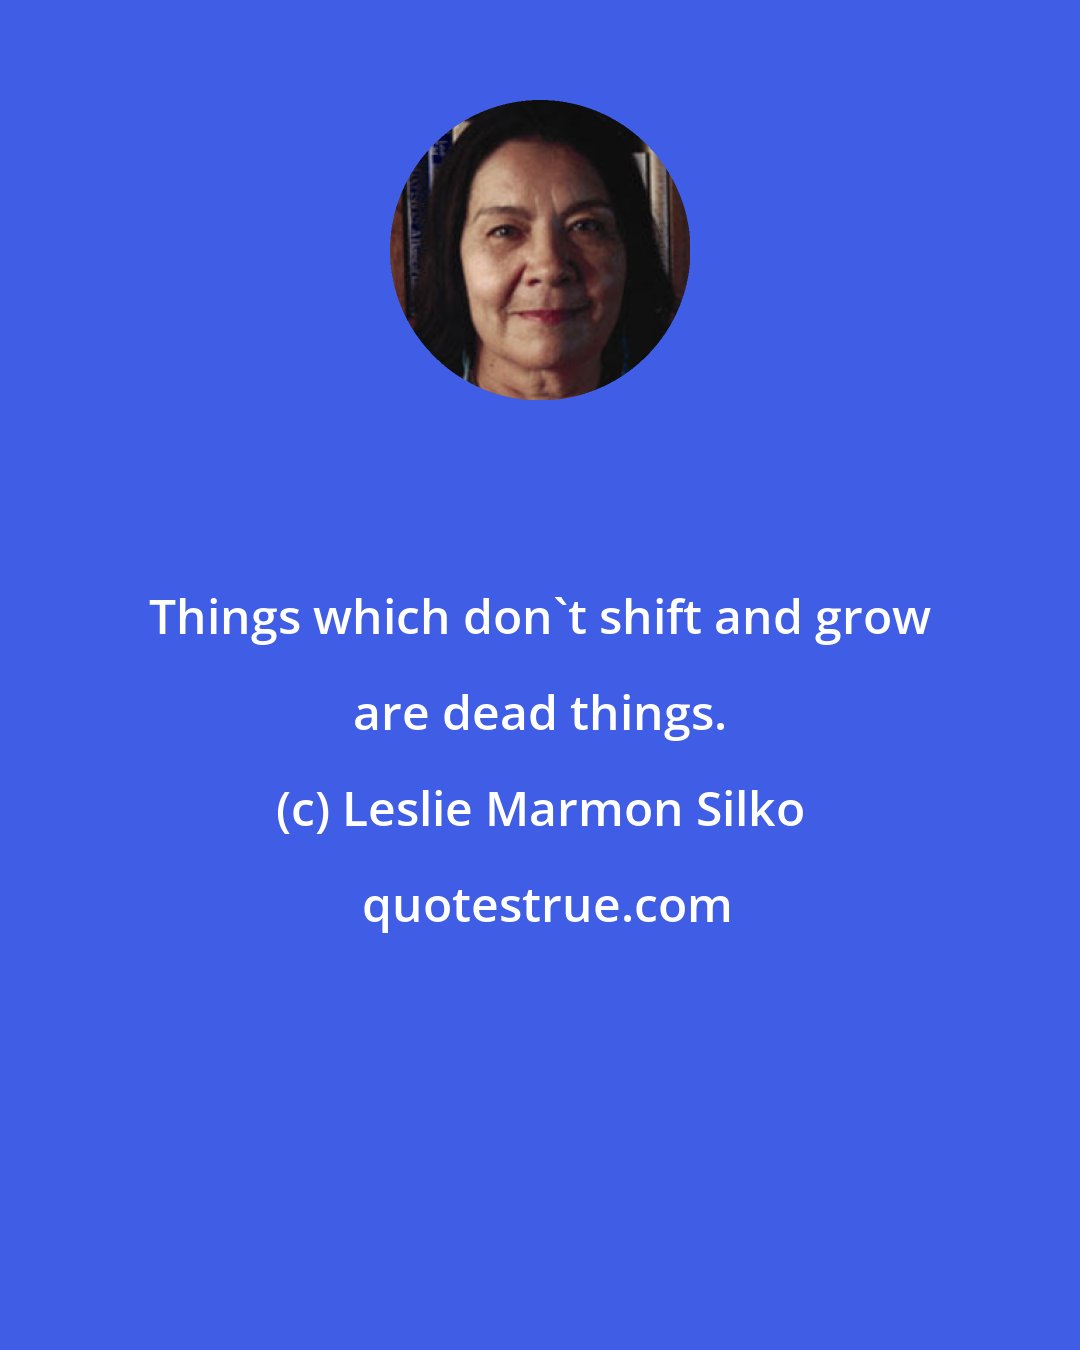 Leslie Marmon Silko: Things which don't shift and grow are dead things.